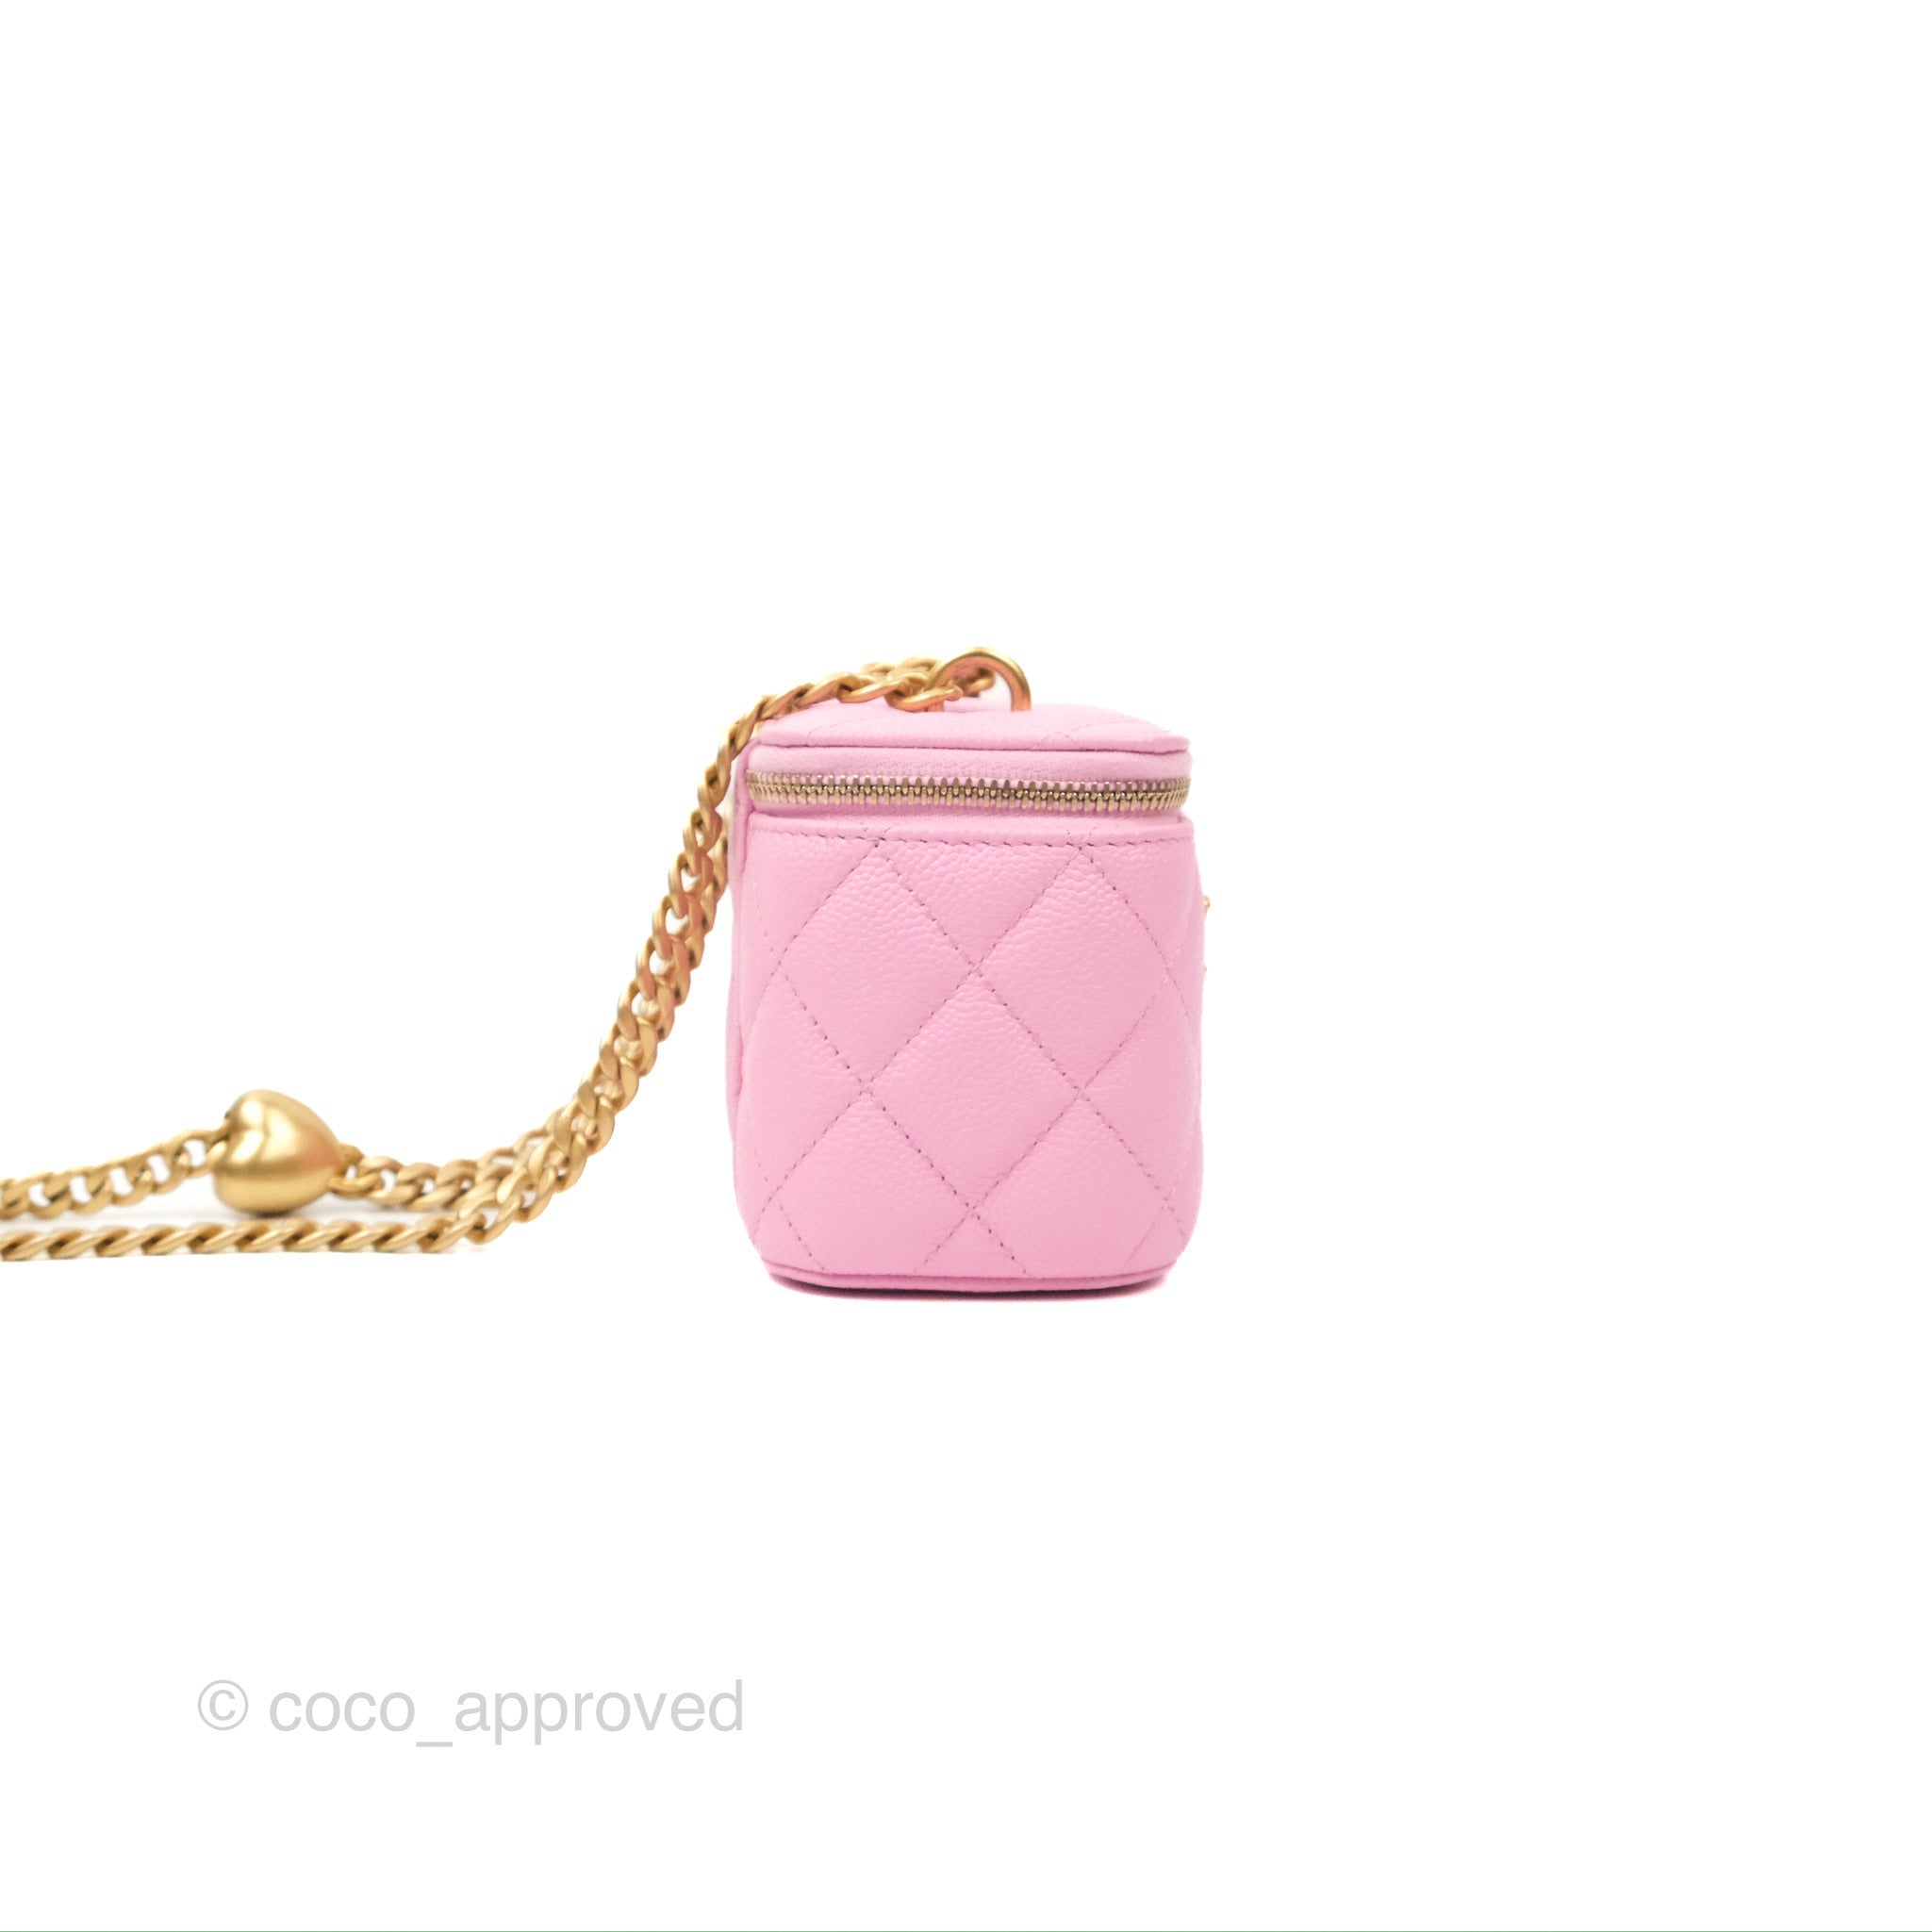 Chanel Pink Quilted Caviar Leather Mini Vanity Case with Chain Bag